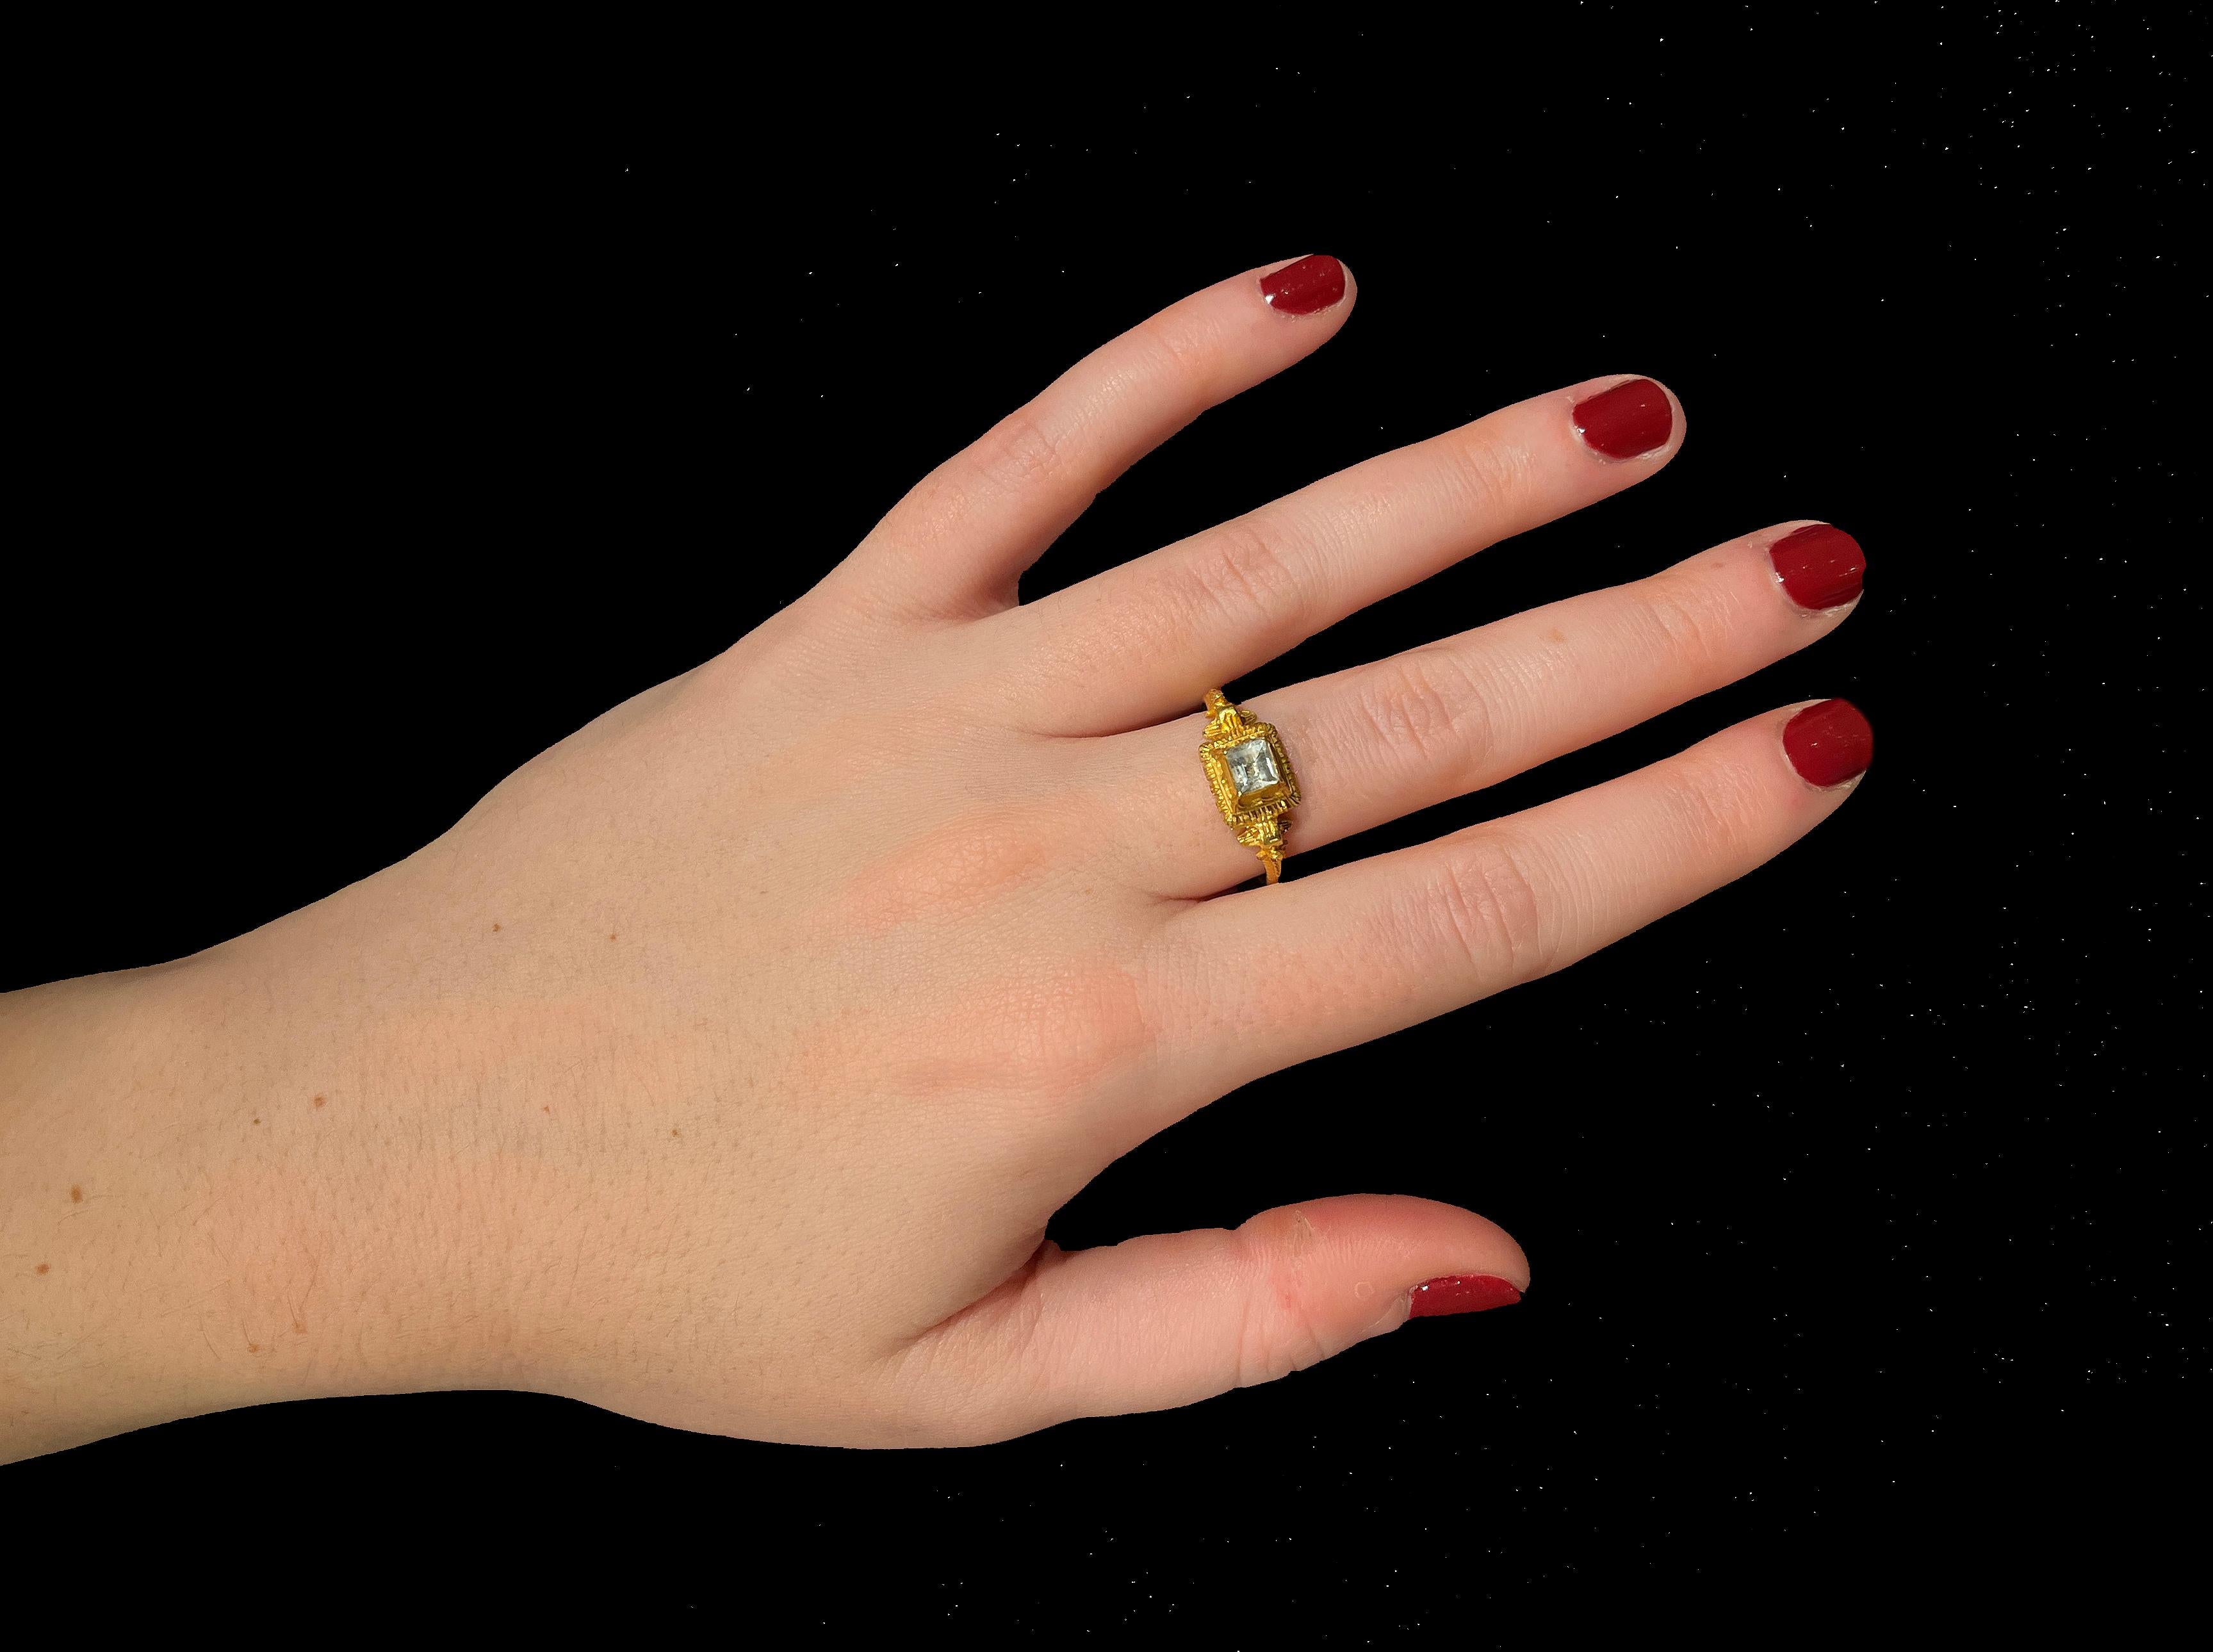 Renaissance Gold Marriage Ring with Table-Cut Rock Crystal For Sale 2